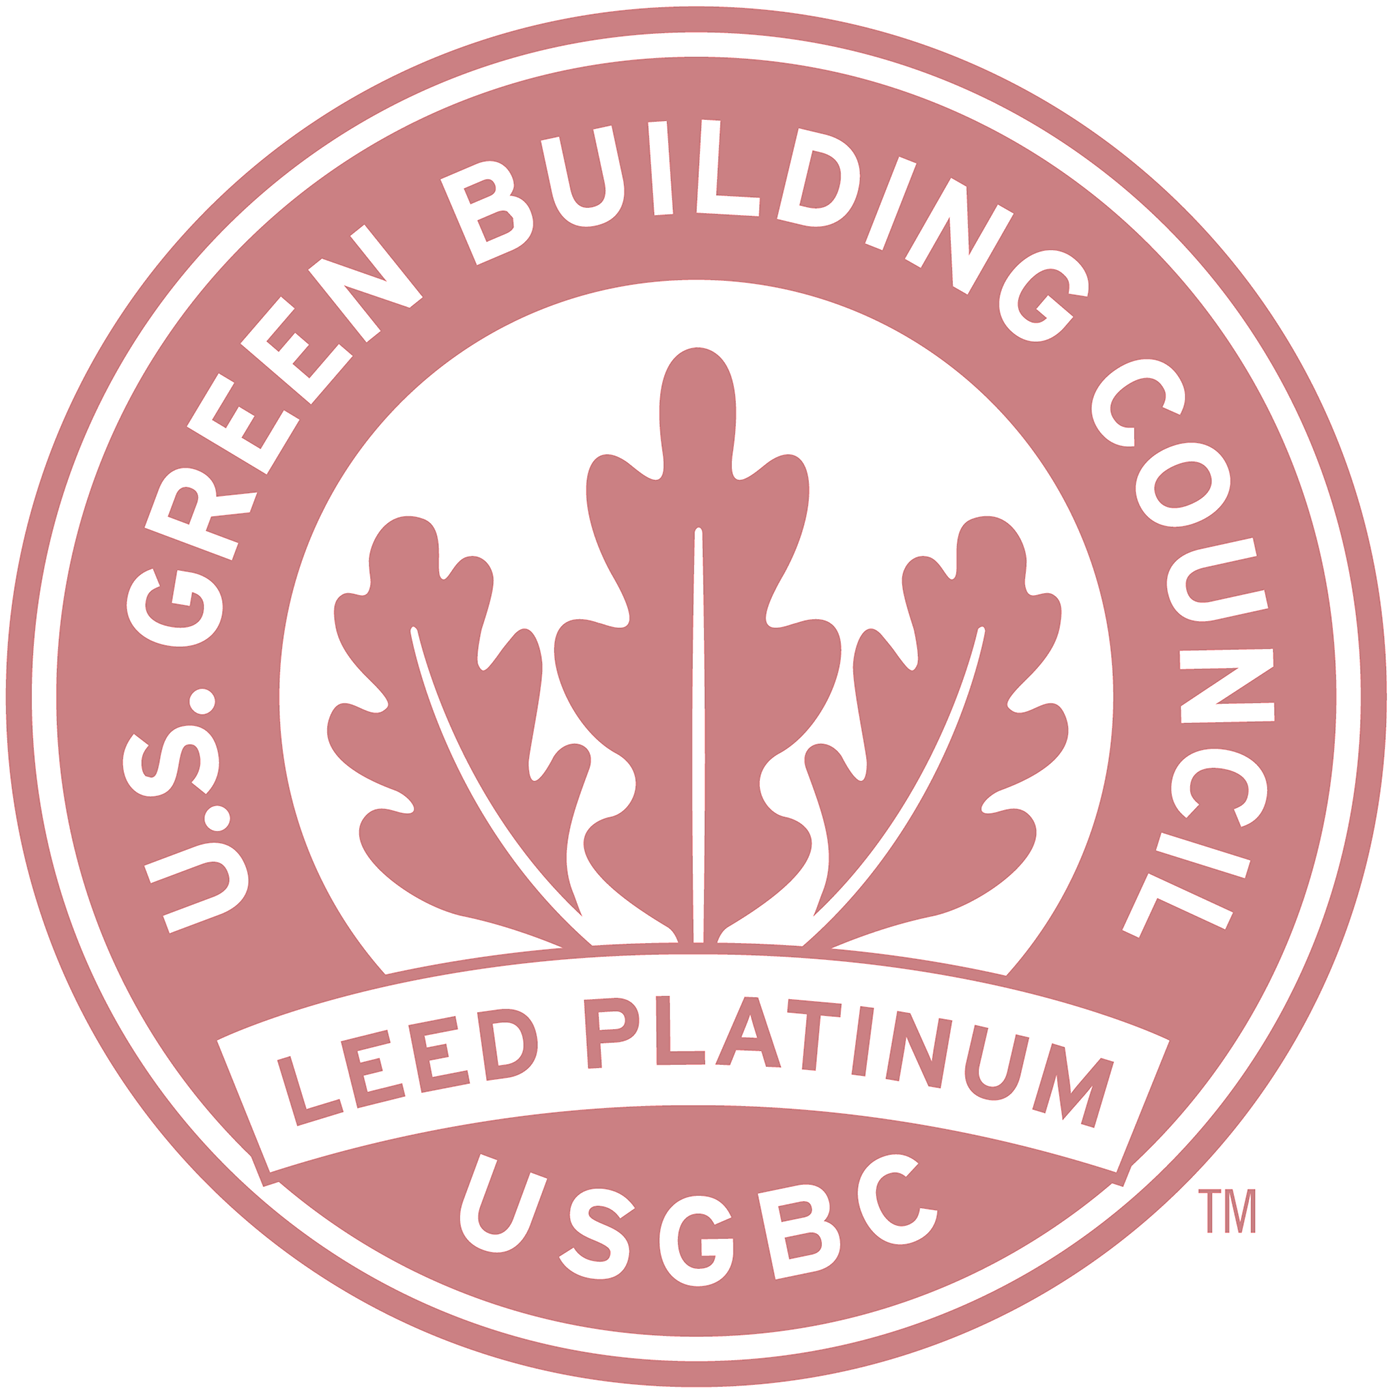 LEED Platinum Certified logo: LEED (Leadership in Energy and Environmental Design) is a certification process that spreads environmental awareness to architects and contractors when constructing buildings. The design incorporates energy-efficient, water-conserving buildings with sustainable materials.  There are four levels in which projects can be rated:  Platinum (80+ points earned) Gold (60-79 points earned) Silver (50-59 points earned) Certified (40-49 points earned)